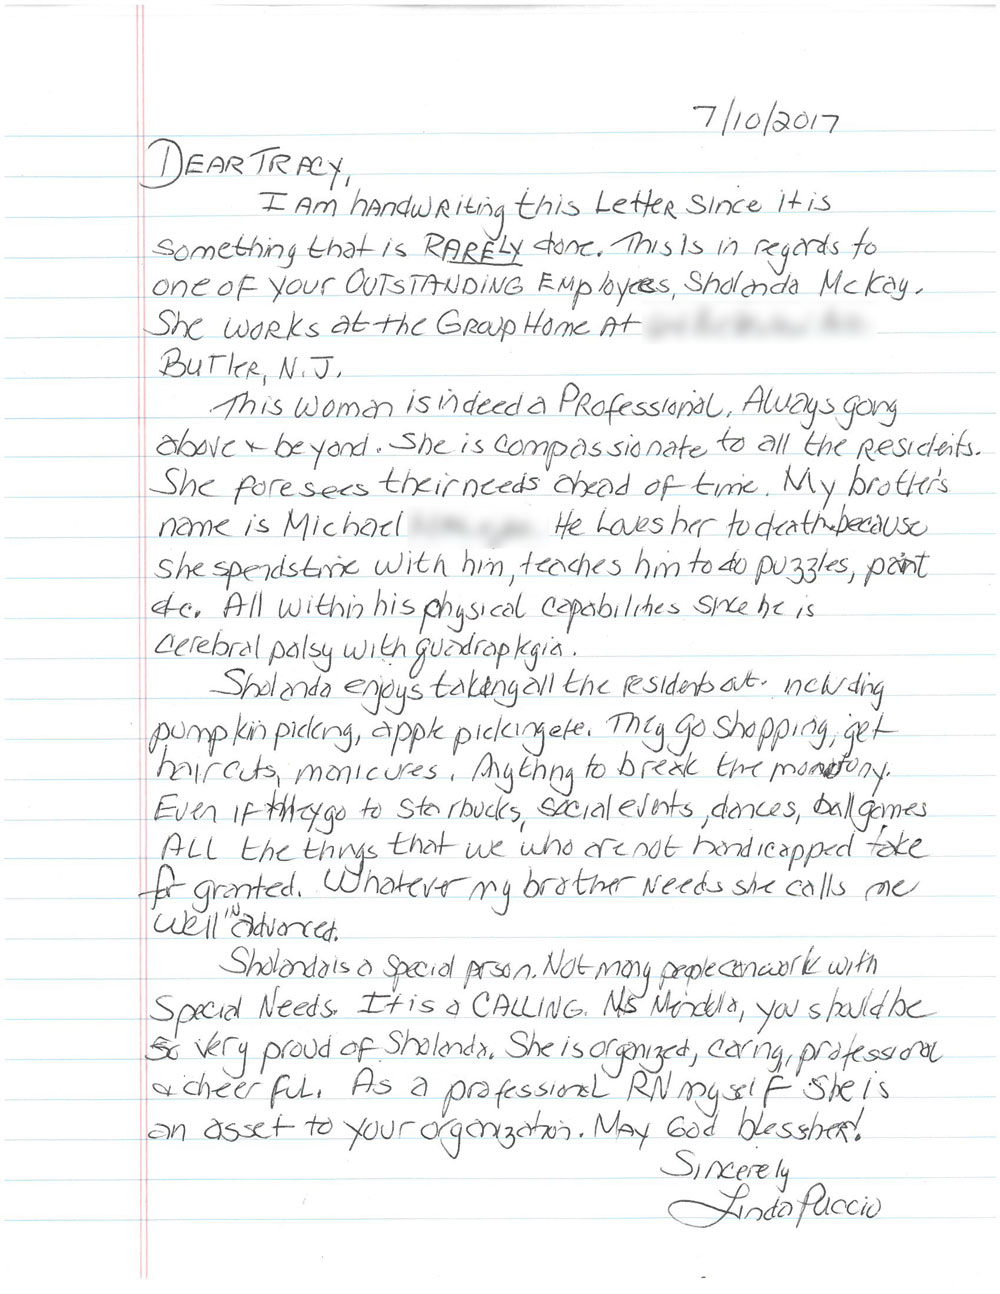 Dear Tracy, I am handwriting this letter since it is something that is rarely done. This is in regards to one of your outstanding employees Shalonda McKay. She works at the group home at (intentionally omited) Butler, NJ. This woman is indeed a professional. Always going above and beyond. She is compassionate to all the residents. She forsees their needs ahead of time. My brothers name is Michael (intentionally omitted). He loves her to death because she spends time with him, teaches him to do puzzles, paint, etc. All within his physical capabilities since he has cerebral palsy with quadroplegia. Sholanda enjoys taking all the residents out including pumpkin picking, apple picking etc. They go shopping get haircuts manicures, anything to break the monoteny. Even if they go to Starbucks, social events, dances, ball games. All the things that we who are not handicapped take for granted. Whatever my brother needs she calls me well in advanced. Sholanda is a special person. Not many people can work with special needs. It is a calling. Ms. Mendello you should be so very proud of Shalonda. She is organized, caring, professional + cheerful. As a professional RN myself she is an asset to your organization. May God bless her! - Sincerely Linda Puccio